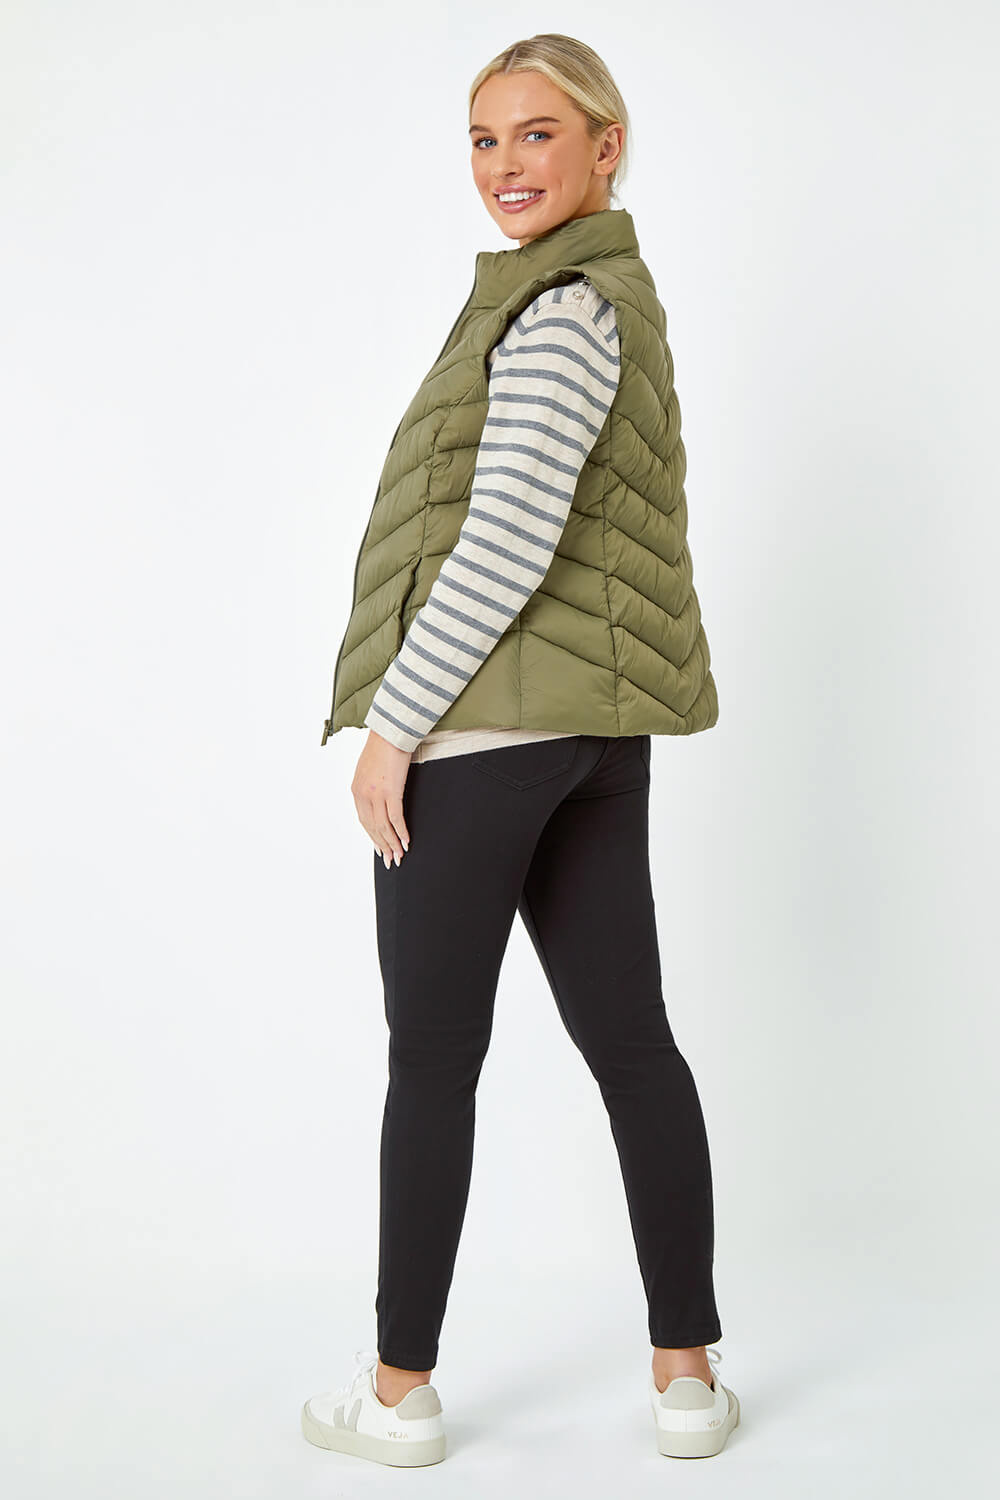 KHAKI Petite Quilted Padded Gilet, Image 3 of 5